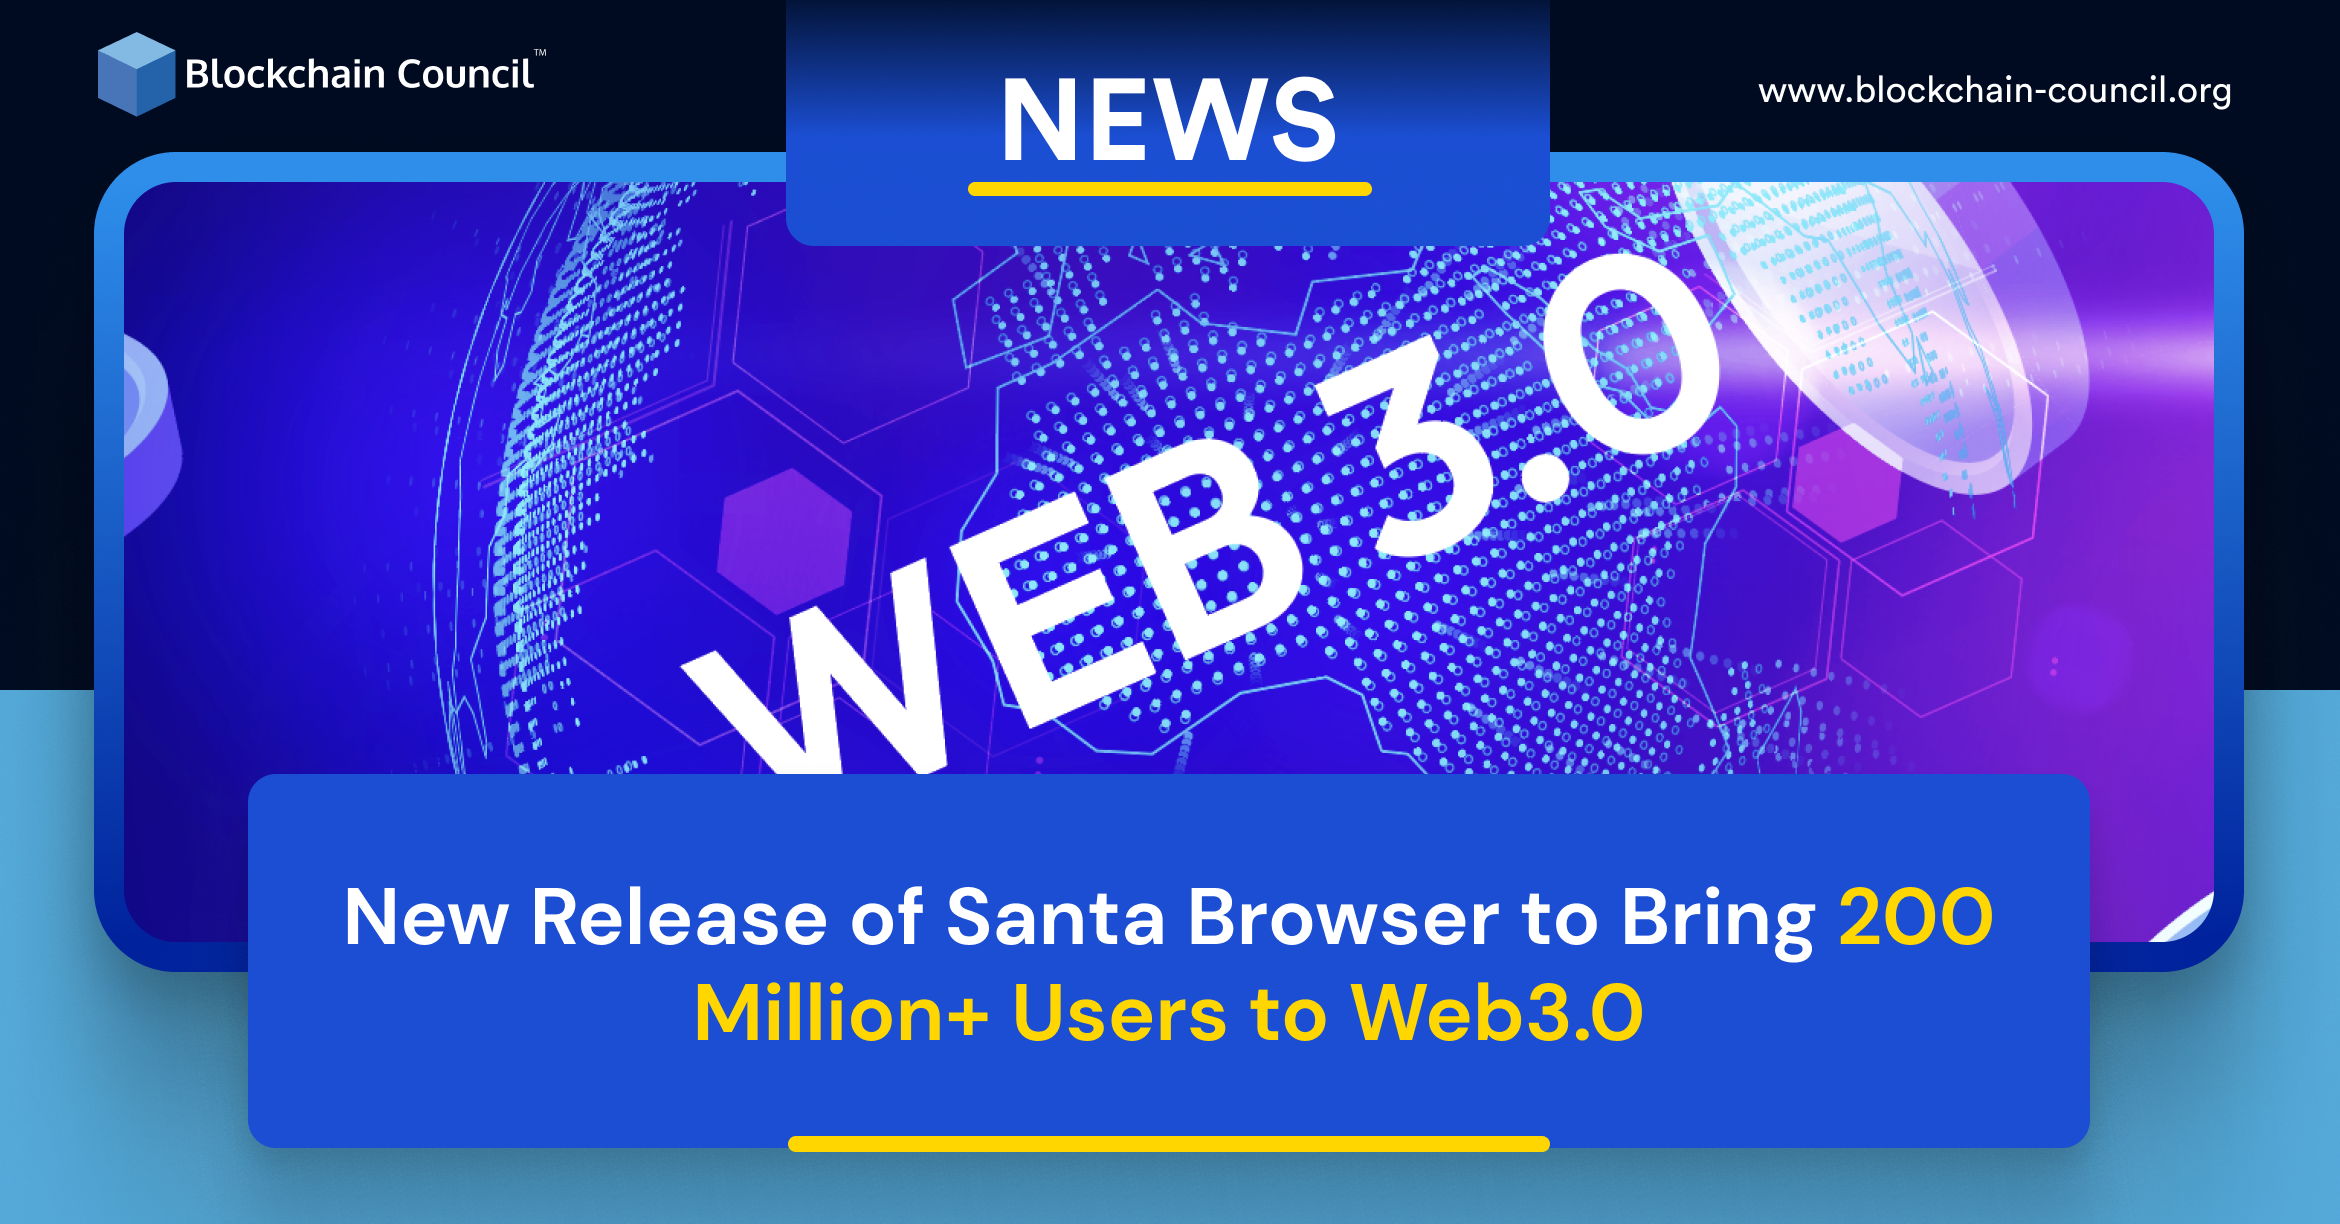 New Release of Santa Browser to Bring 200 Million+ Users to Web3.0